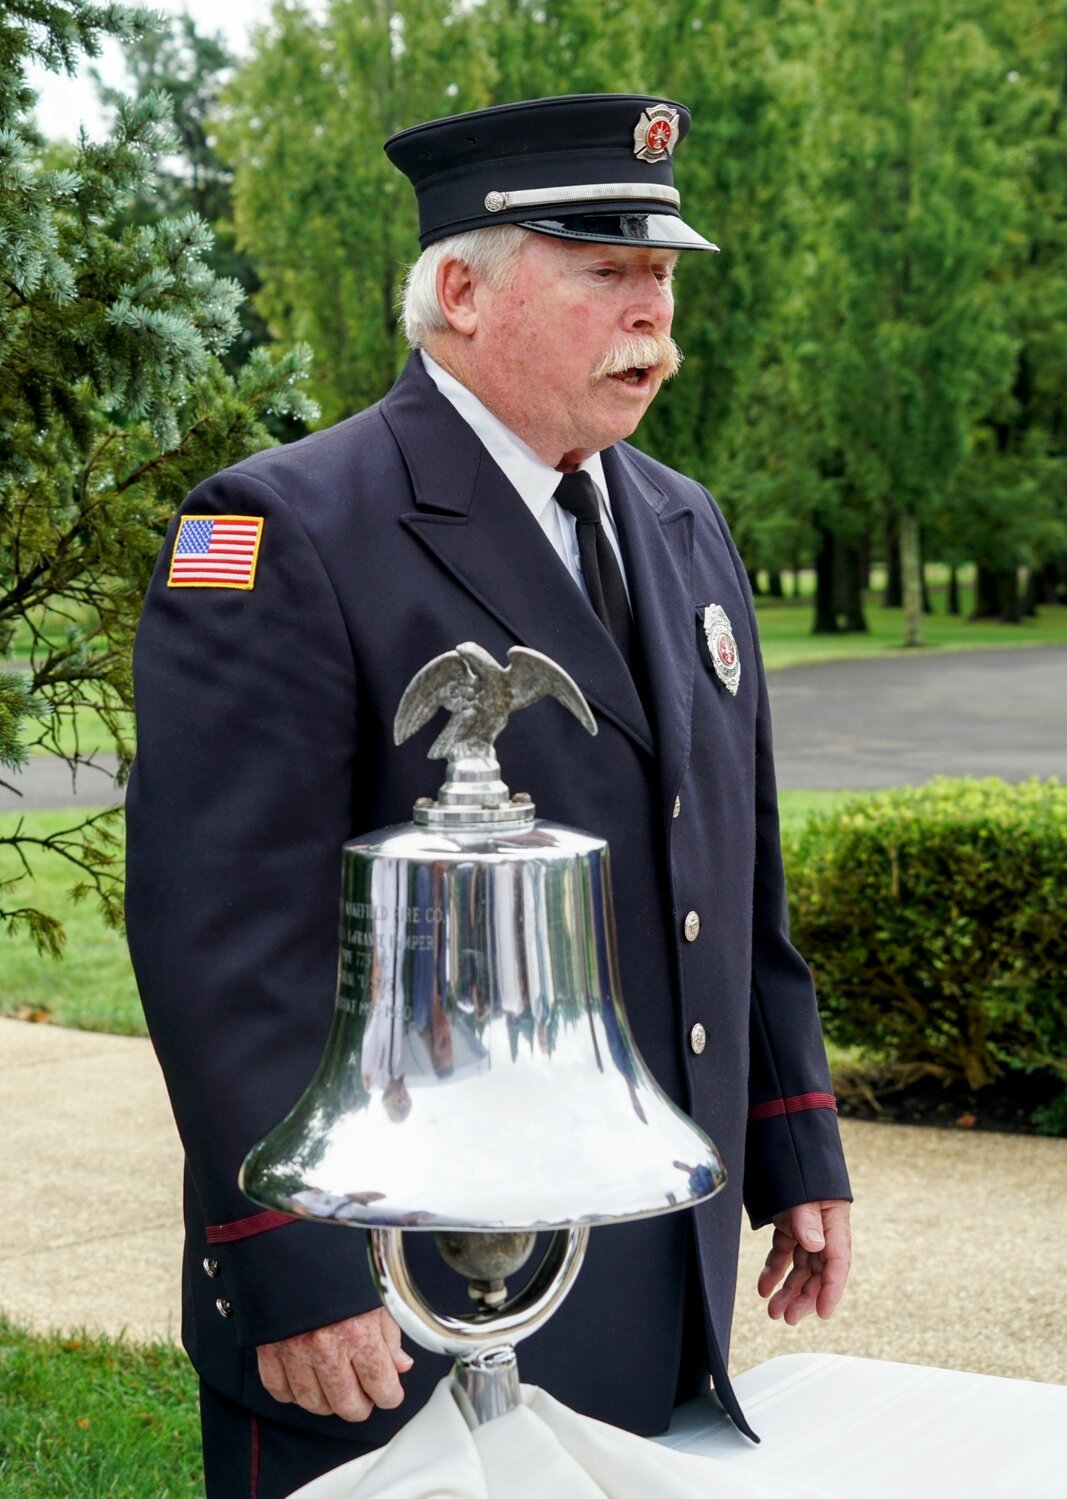 Yardley-Makefield Fire Co. President Larry Newman rang the bell at the moment of each attack that occurred on the morning of Sept. 11, 2001.